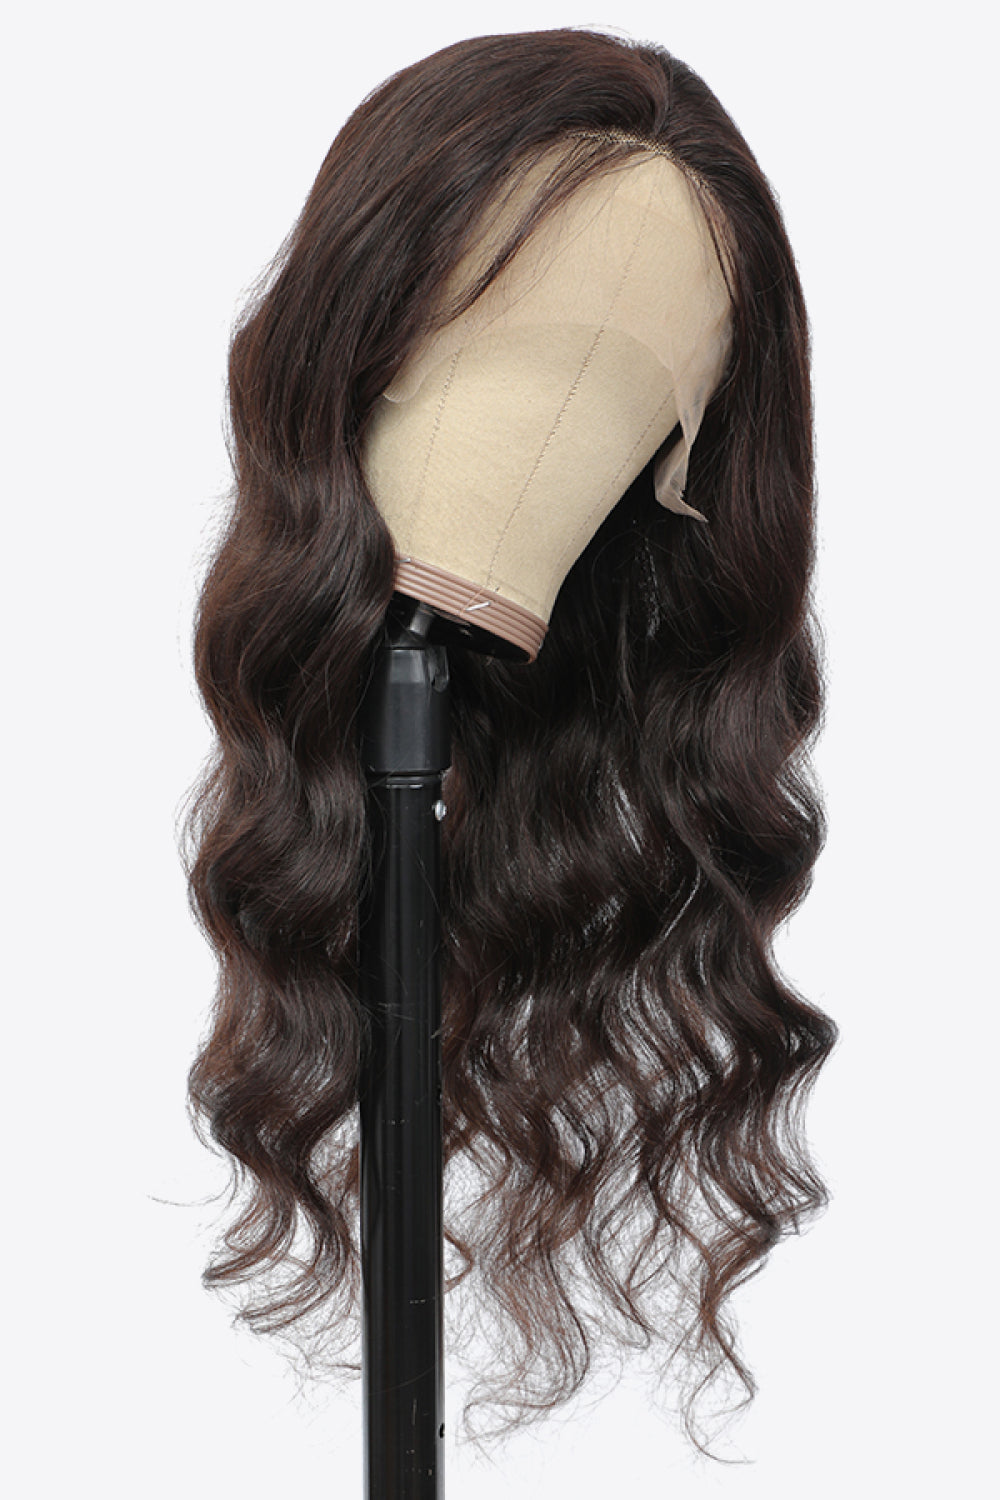 Lace Front Wigs Body Wave Human Virgin Hair Natural Color 150% Density